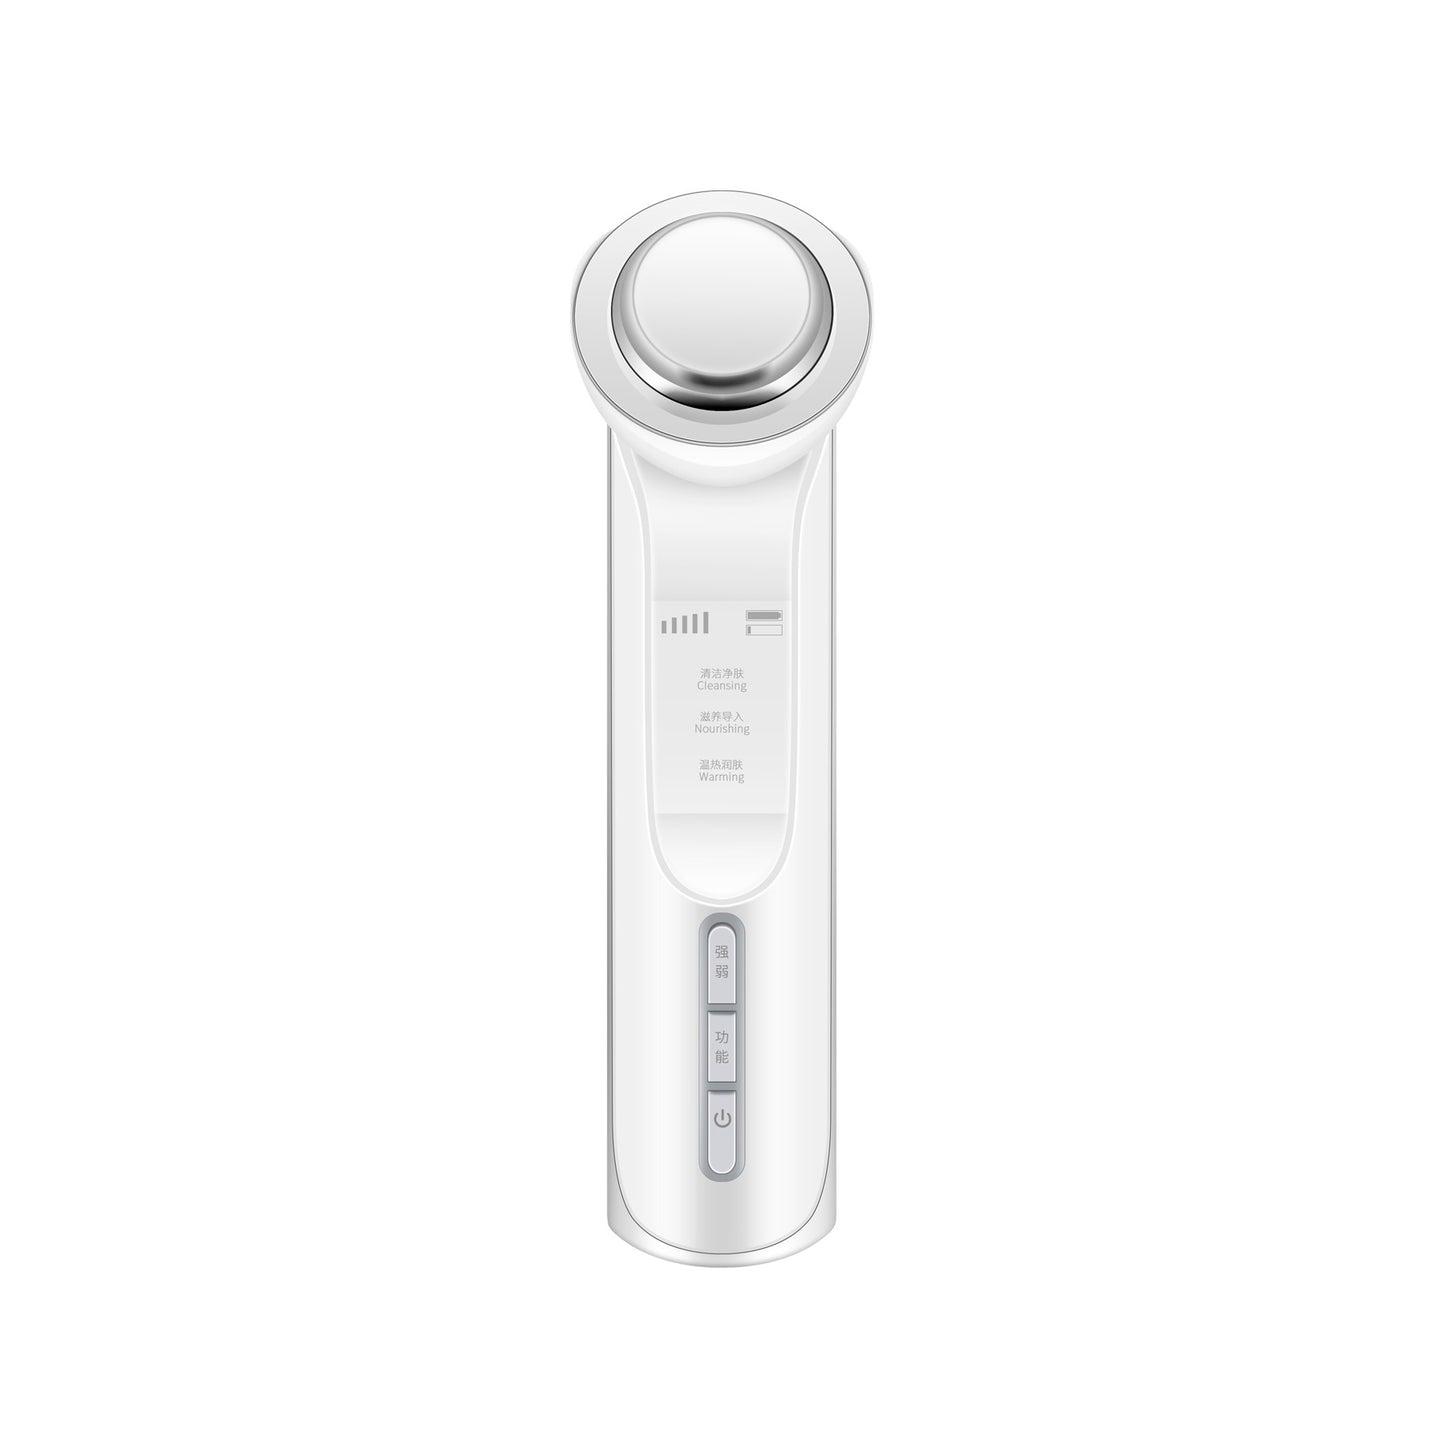 K.SKIN KD9960 Ion Beauty Introduction Instrument Face Cleansing Massager